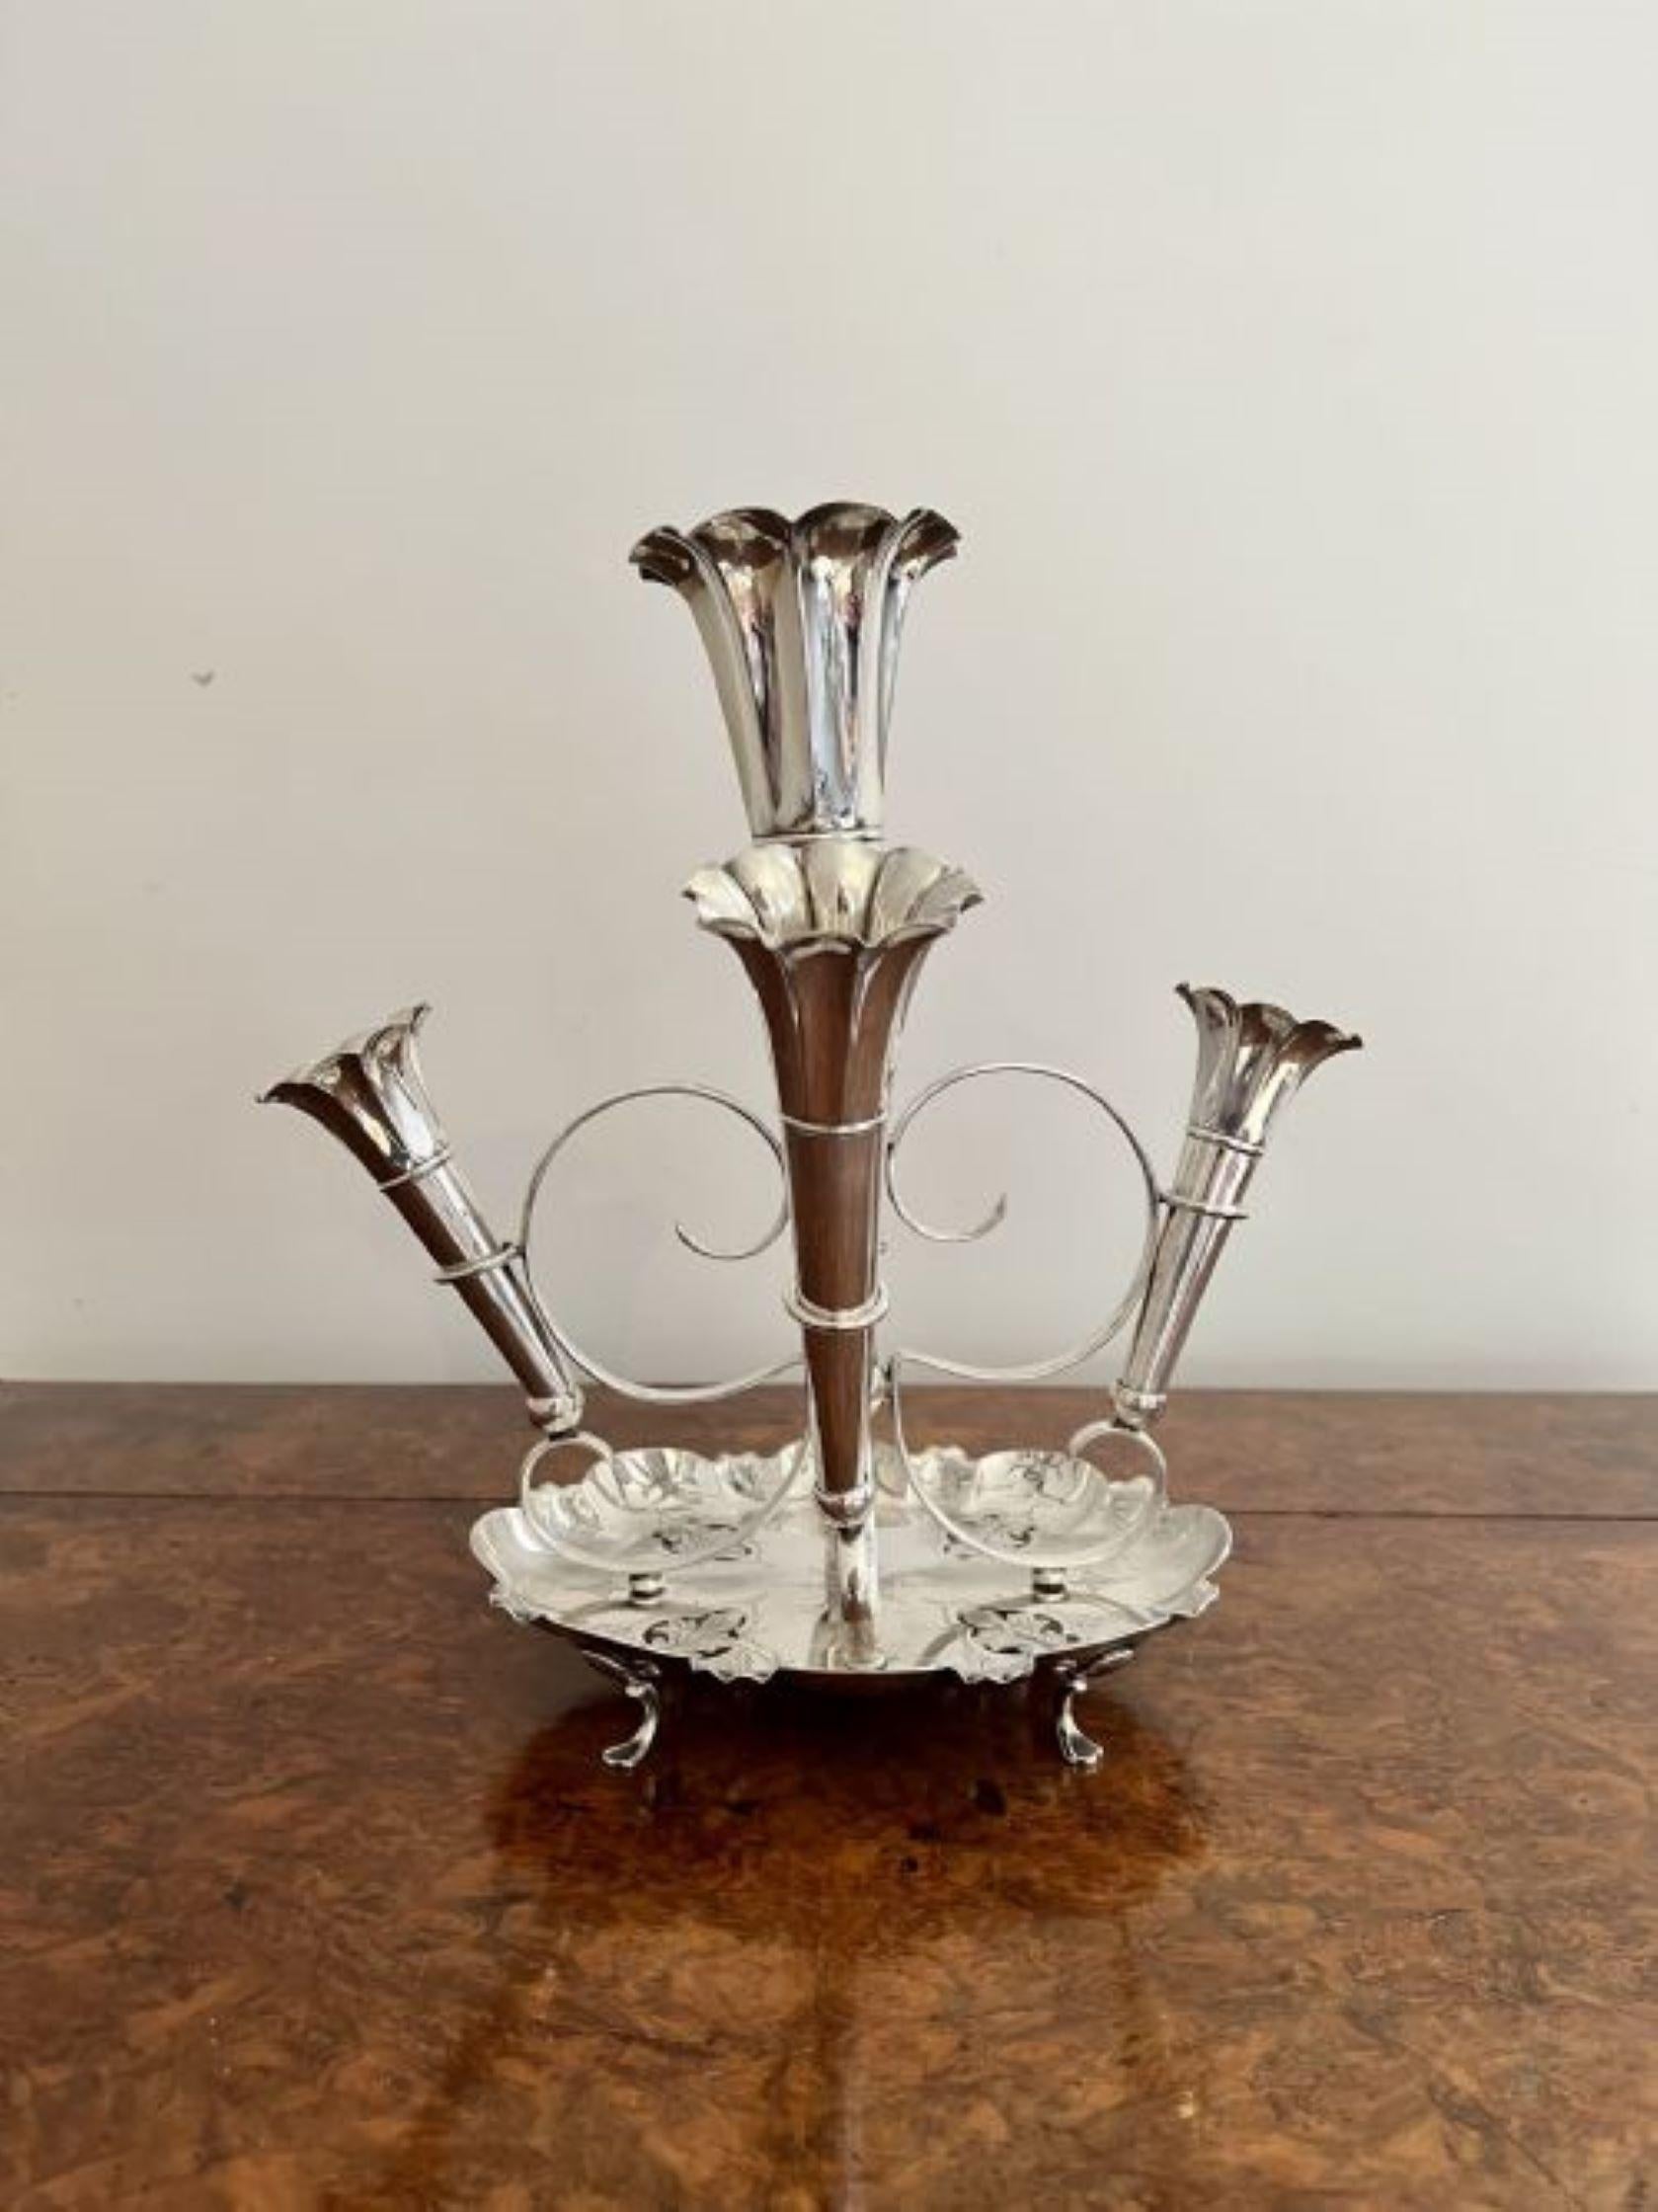 Stunning quality antique Victorian silver plated five branch epergne having a stunning quality antique Victorian silver plated epergne with a large central tapering vase surrounded by four smaller vases on a wonderful ornate silver plated base